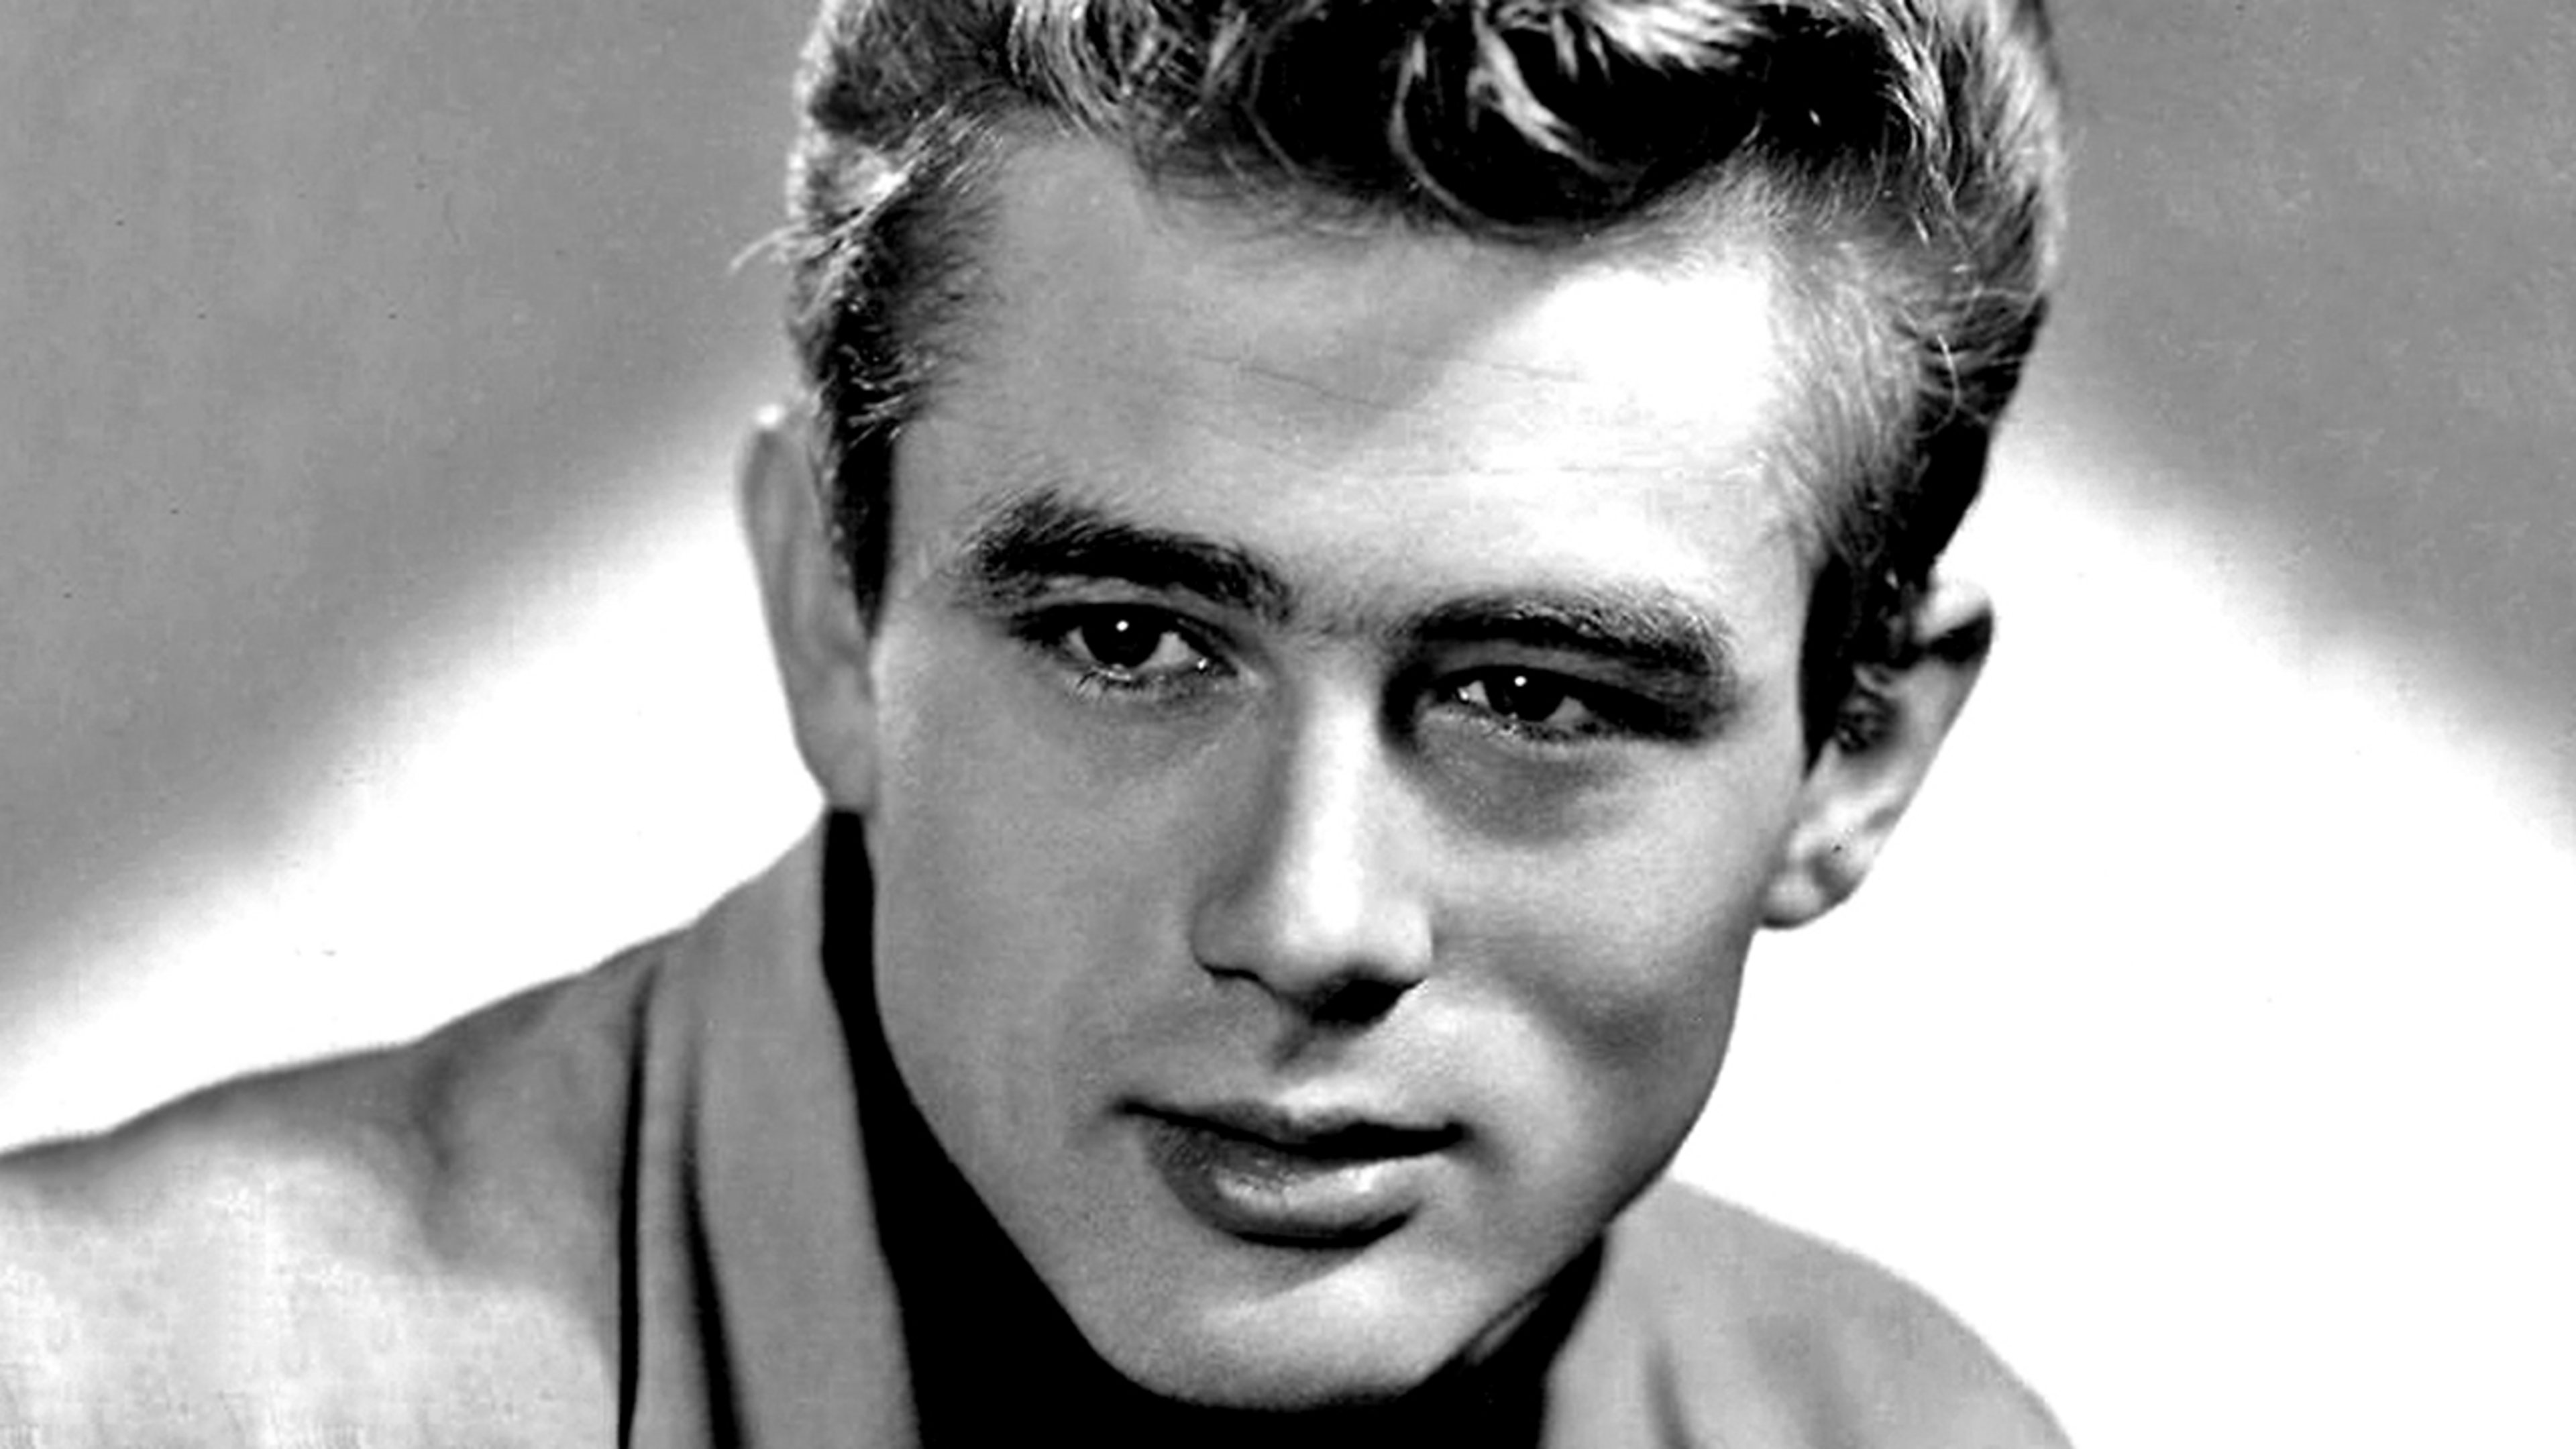 An all-CGI James Dean has been cast in a new action-drama, set during the Vietnam War era